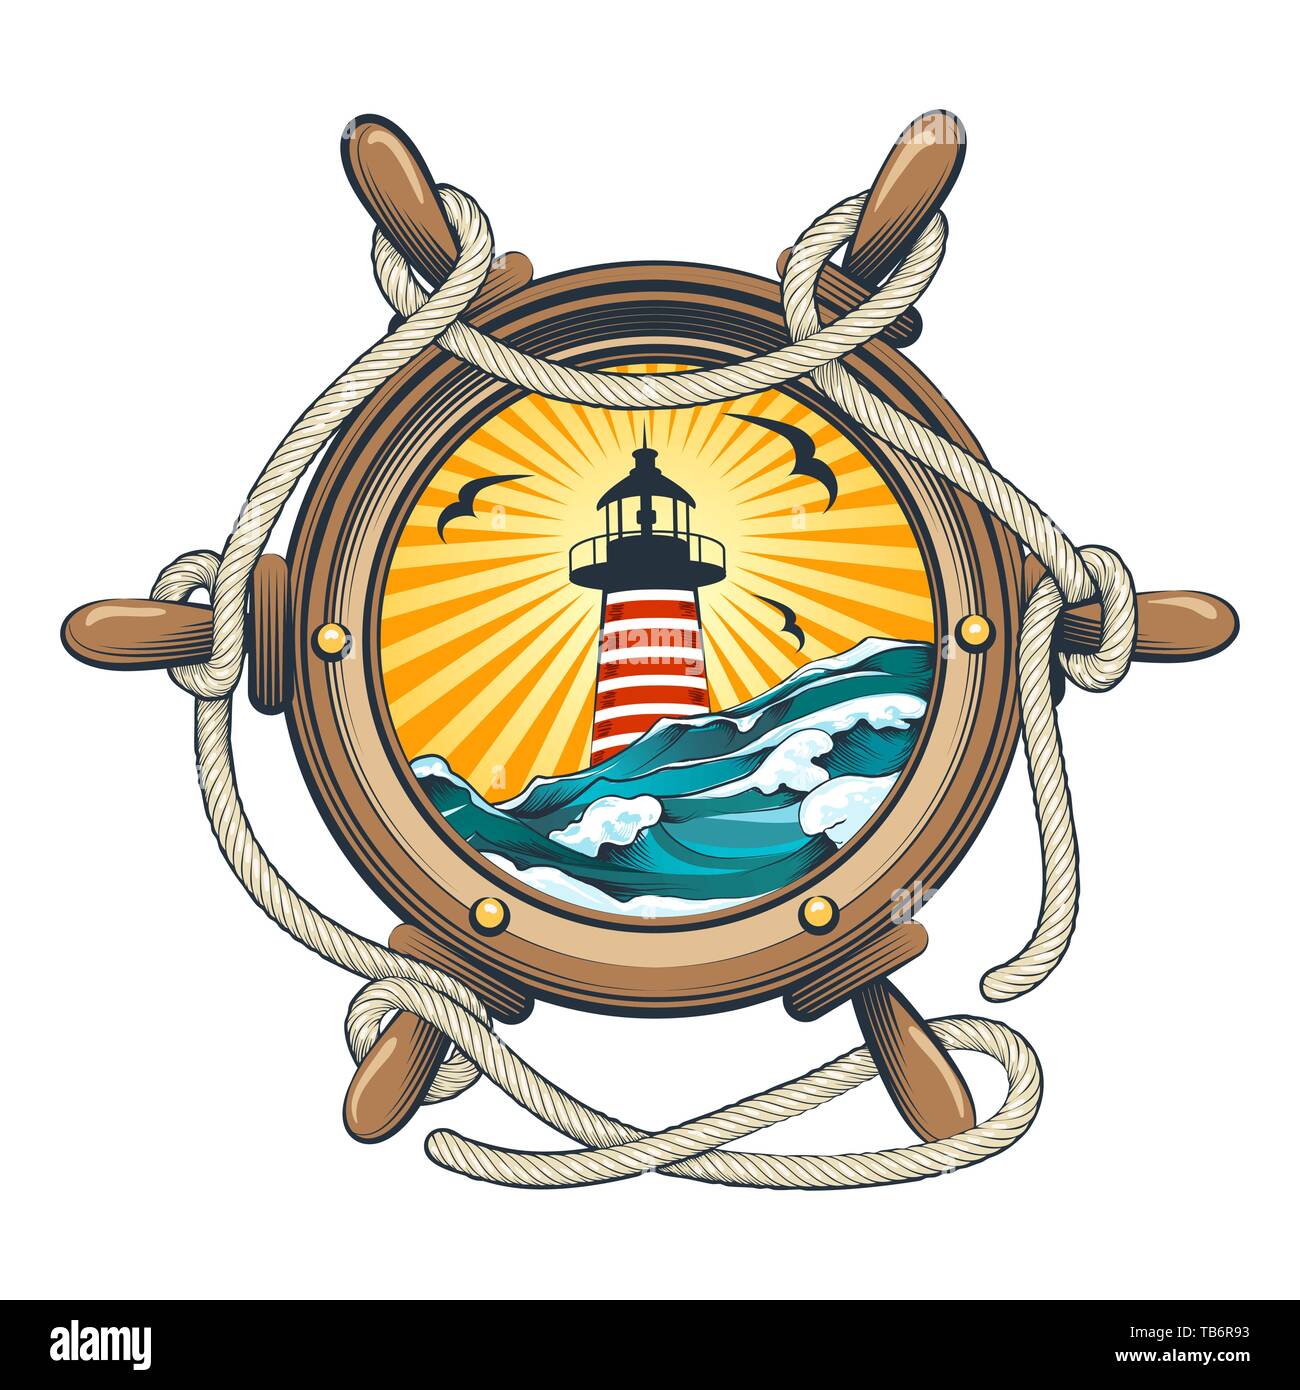 Ship wheel with lighthouse and seascape inside. Vector illustration. Stock Vector